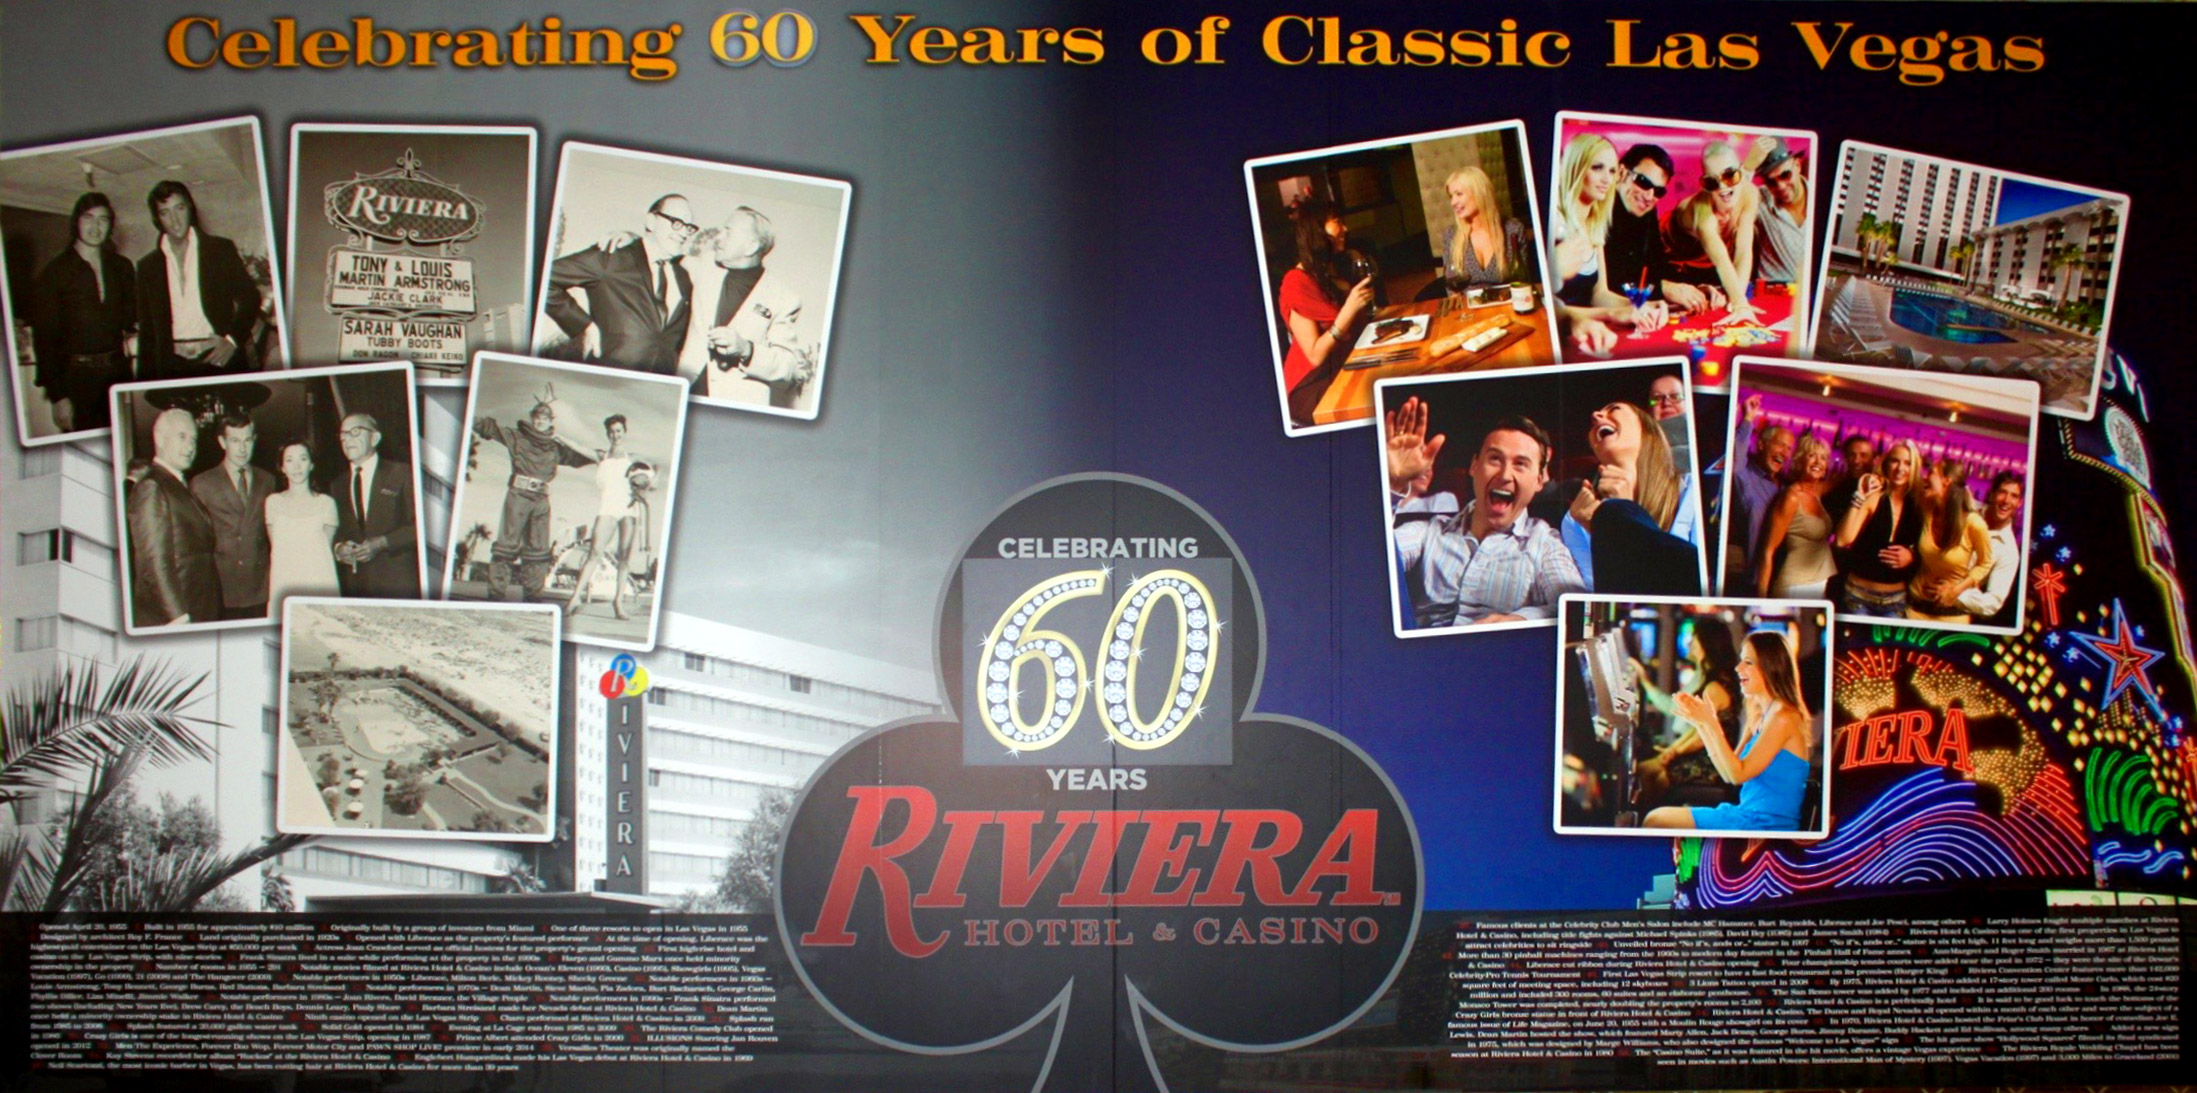 On This Date: April 20, 1955 The Riviera Hotel & Casino opened on